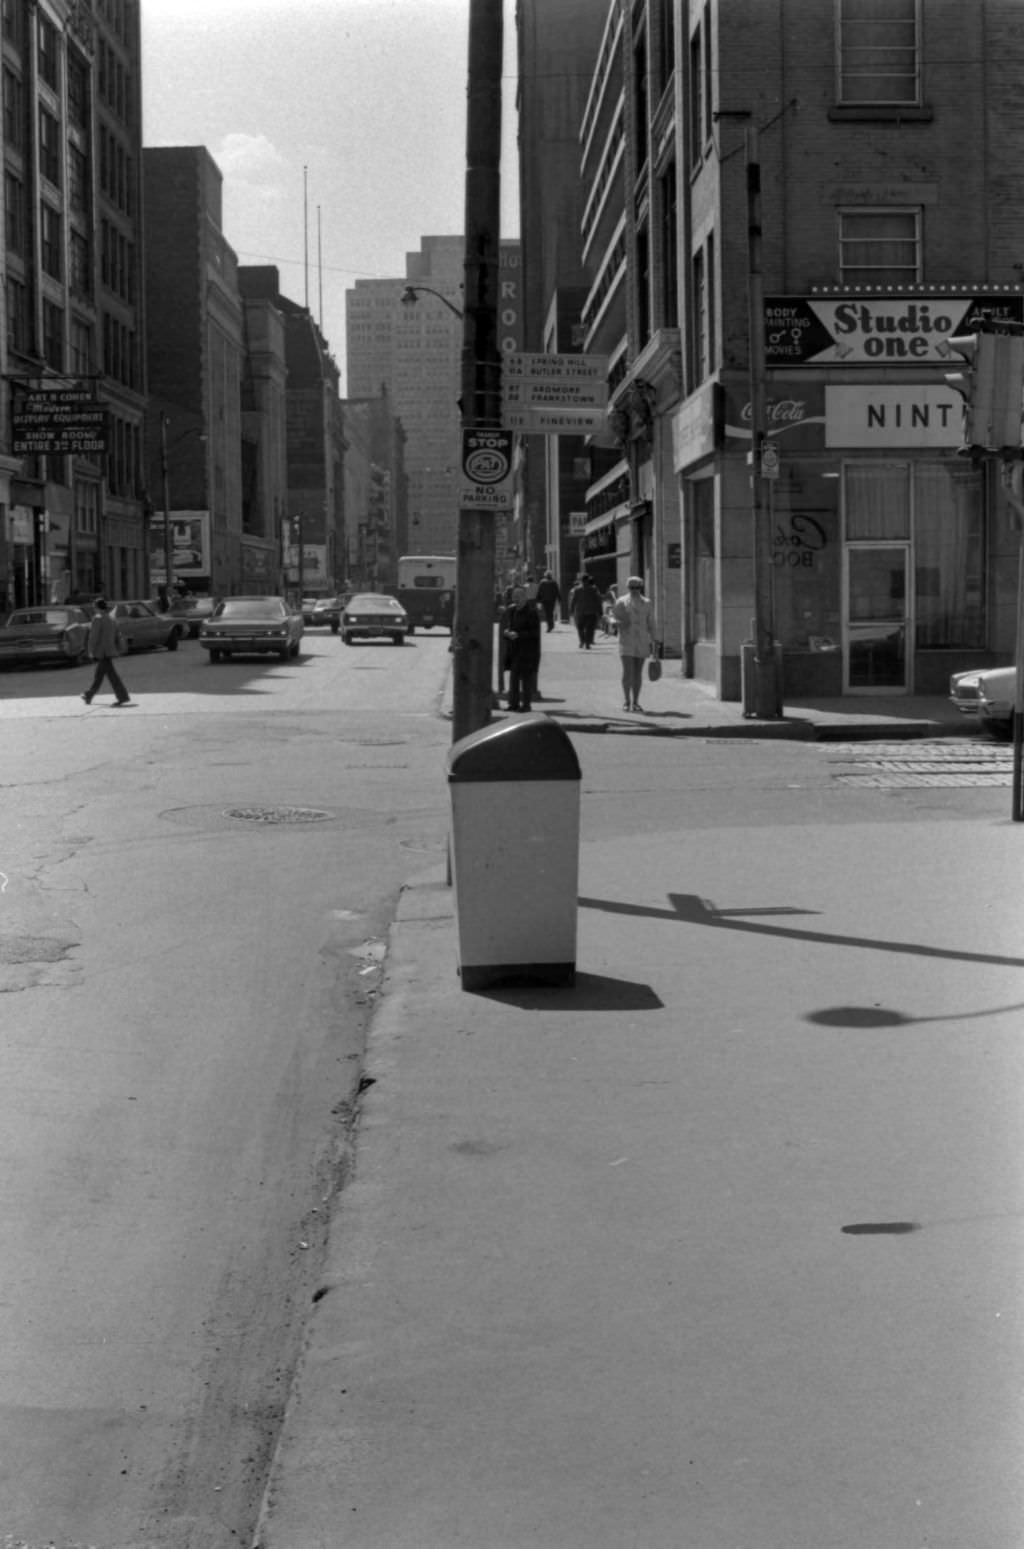 Penn Avenue meets 9th Street, view of pedestrians and businesses, 1972.